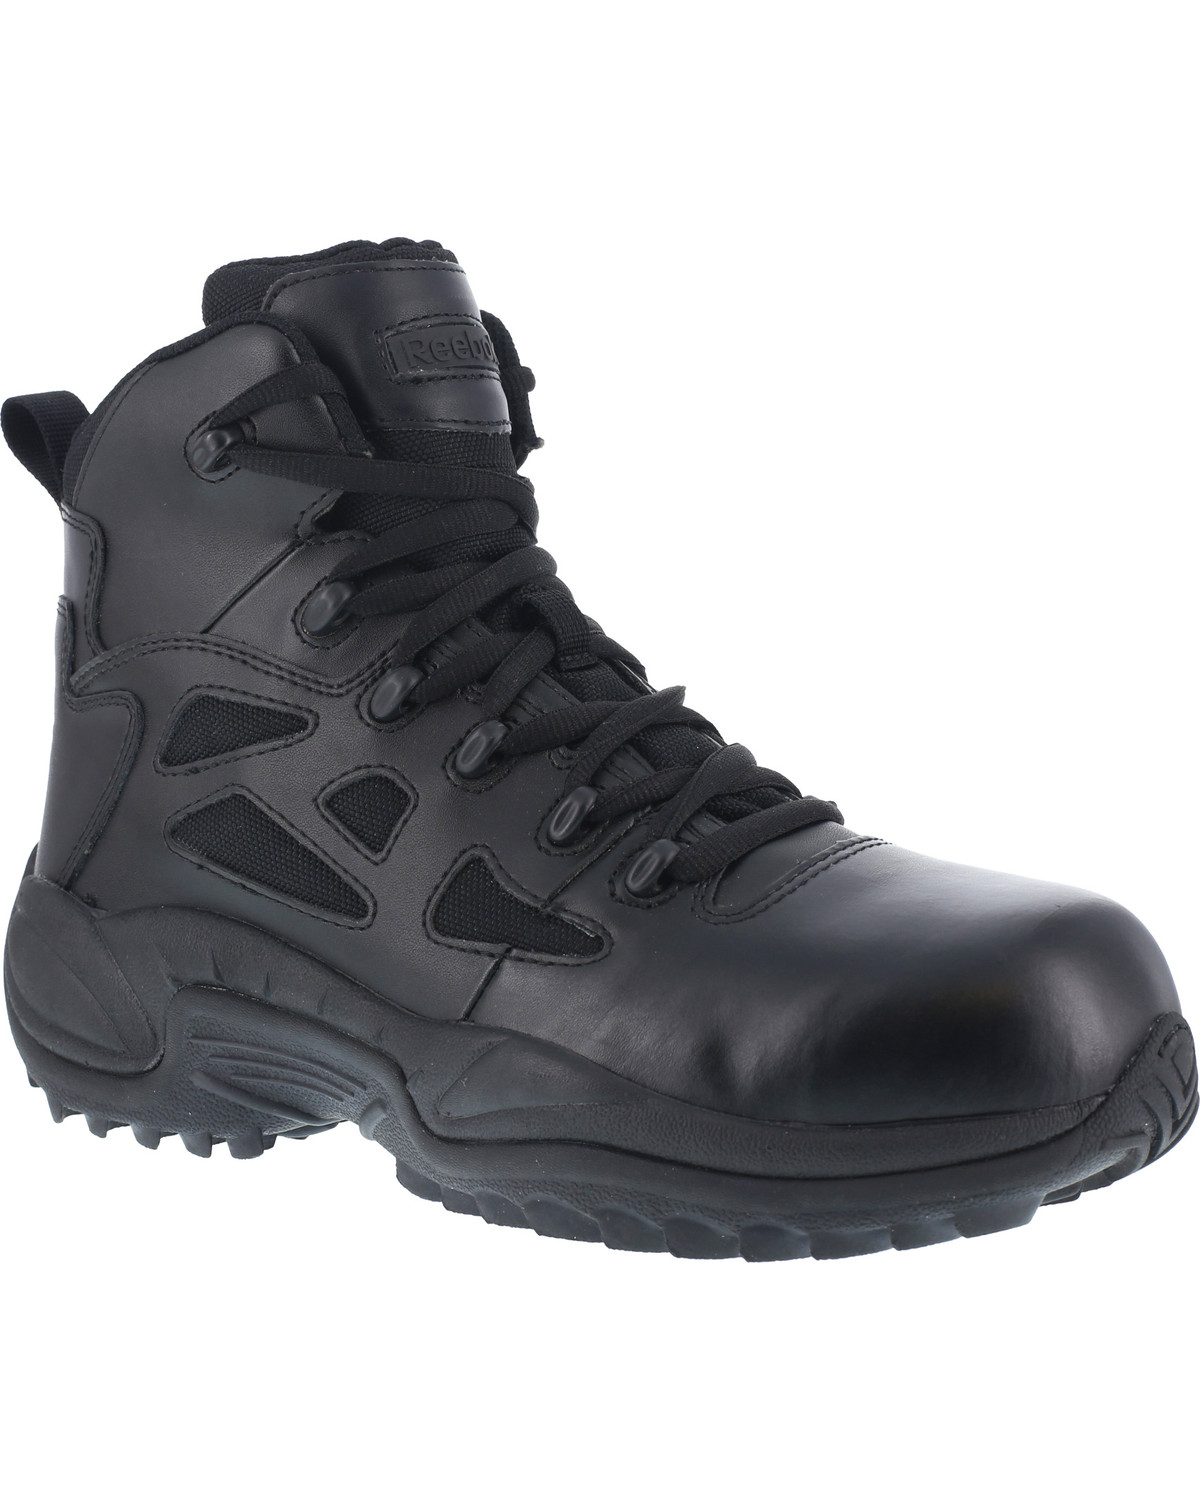 Reebok Men's Stealth 6" Lace-Up Side Zip Work Boots - Composite Toe